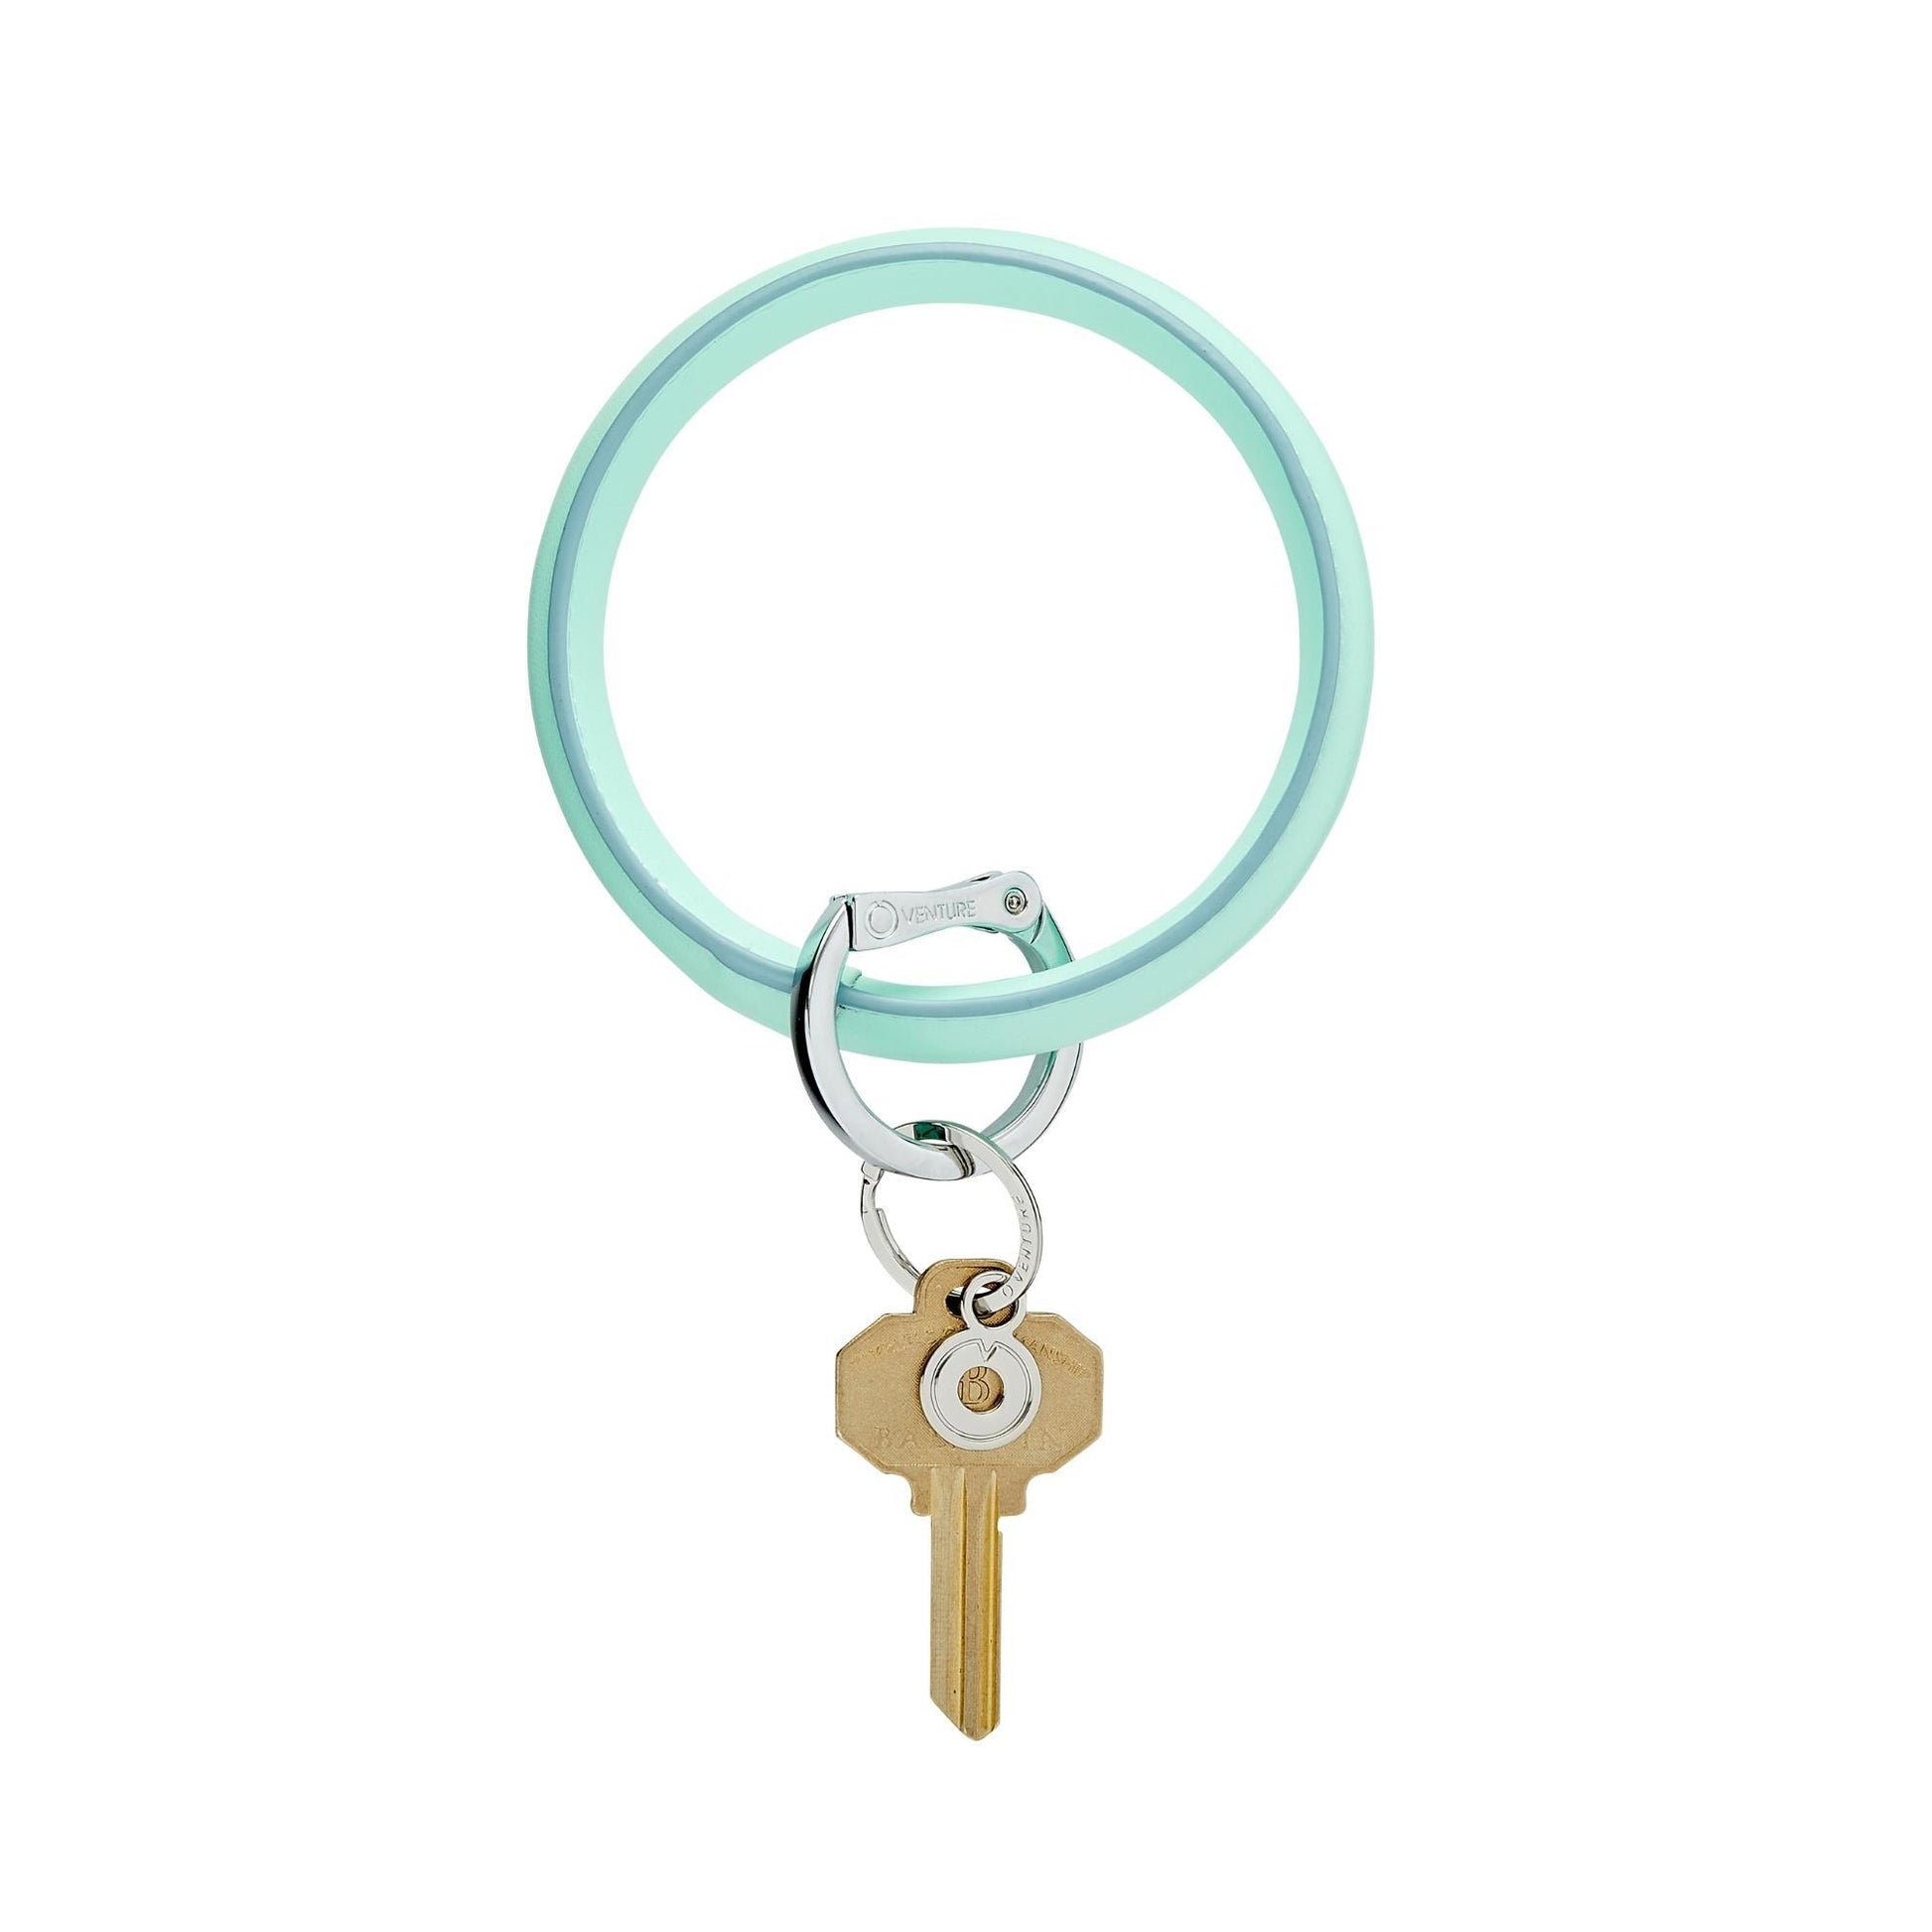 Mint green leather big O key ring with silver locking clasp showing the back seam